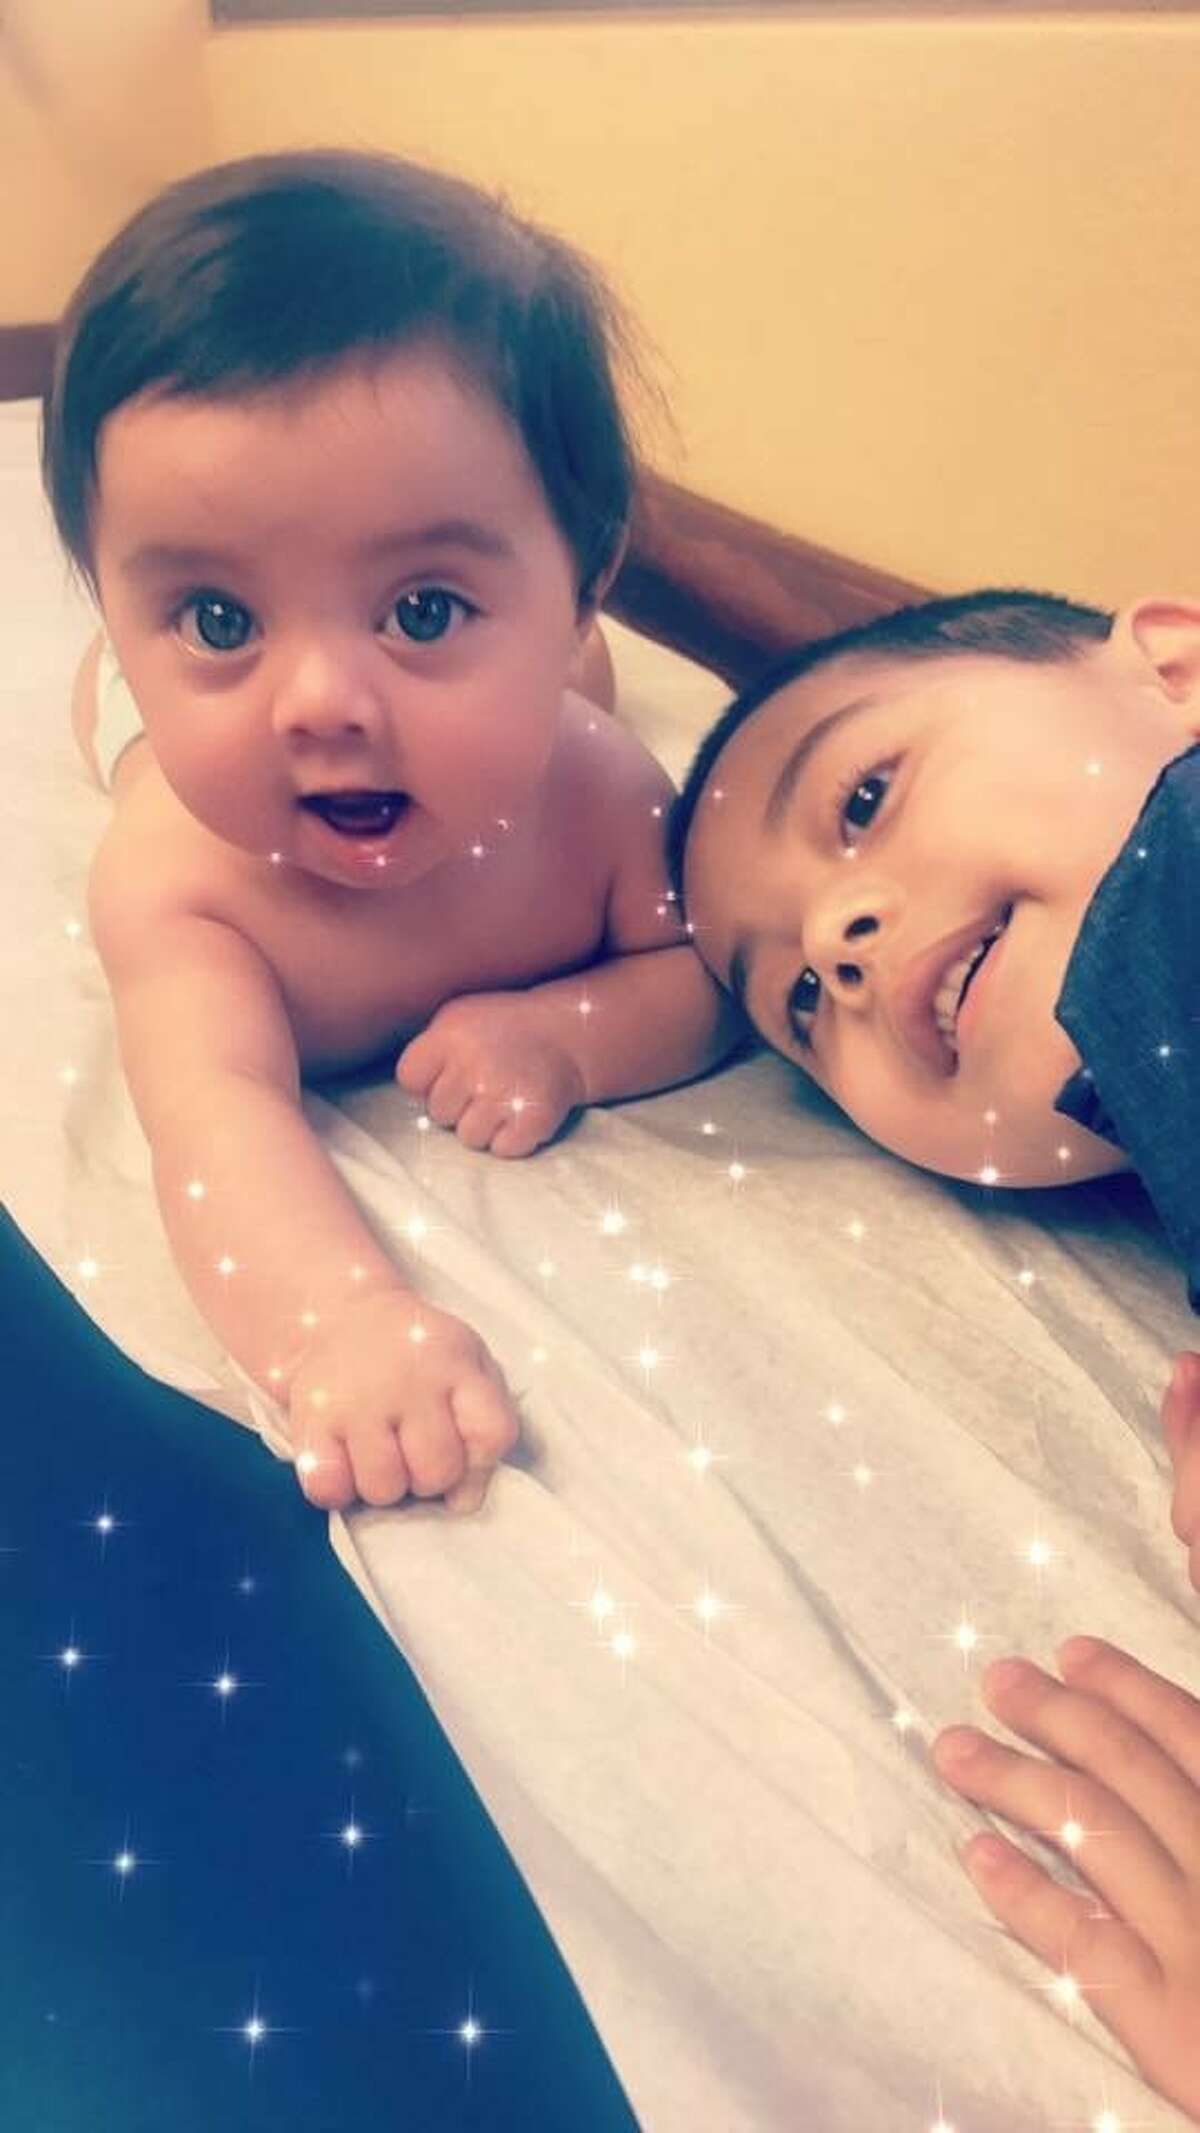 Michael Carter Donnell, nicknamed Carter, died suddenly on July 23, 2018, after being found unresponsive at Our Little Hopes and Dreams Christian Learning Center on Callaghan Road. He was 7 months old. He is shown here with his older brother.